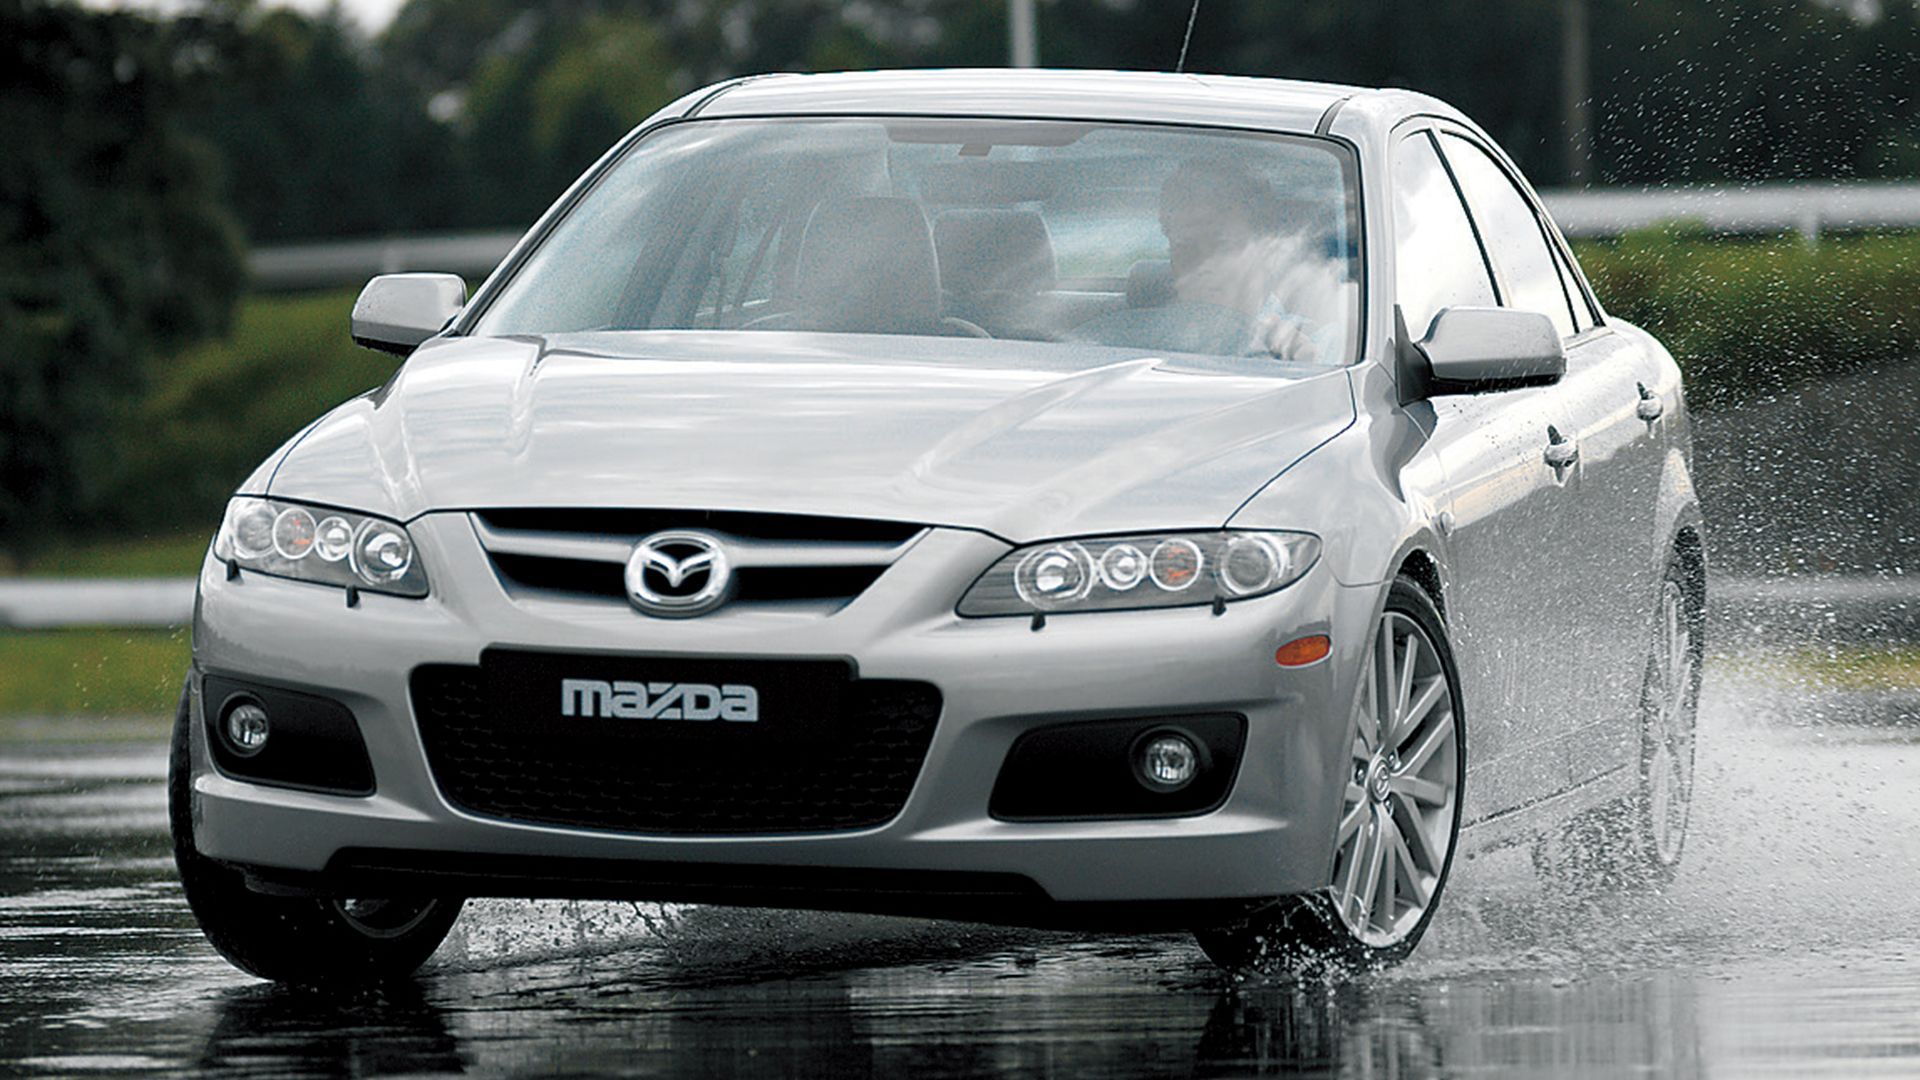 Exterior shot of the 2005 Mazda 6 MPS